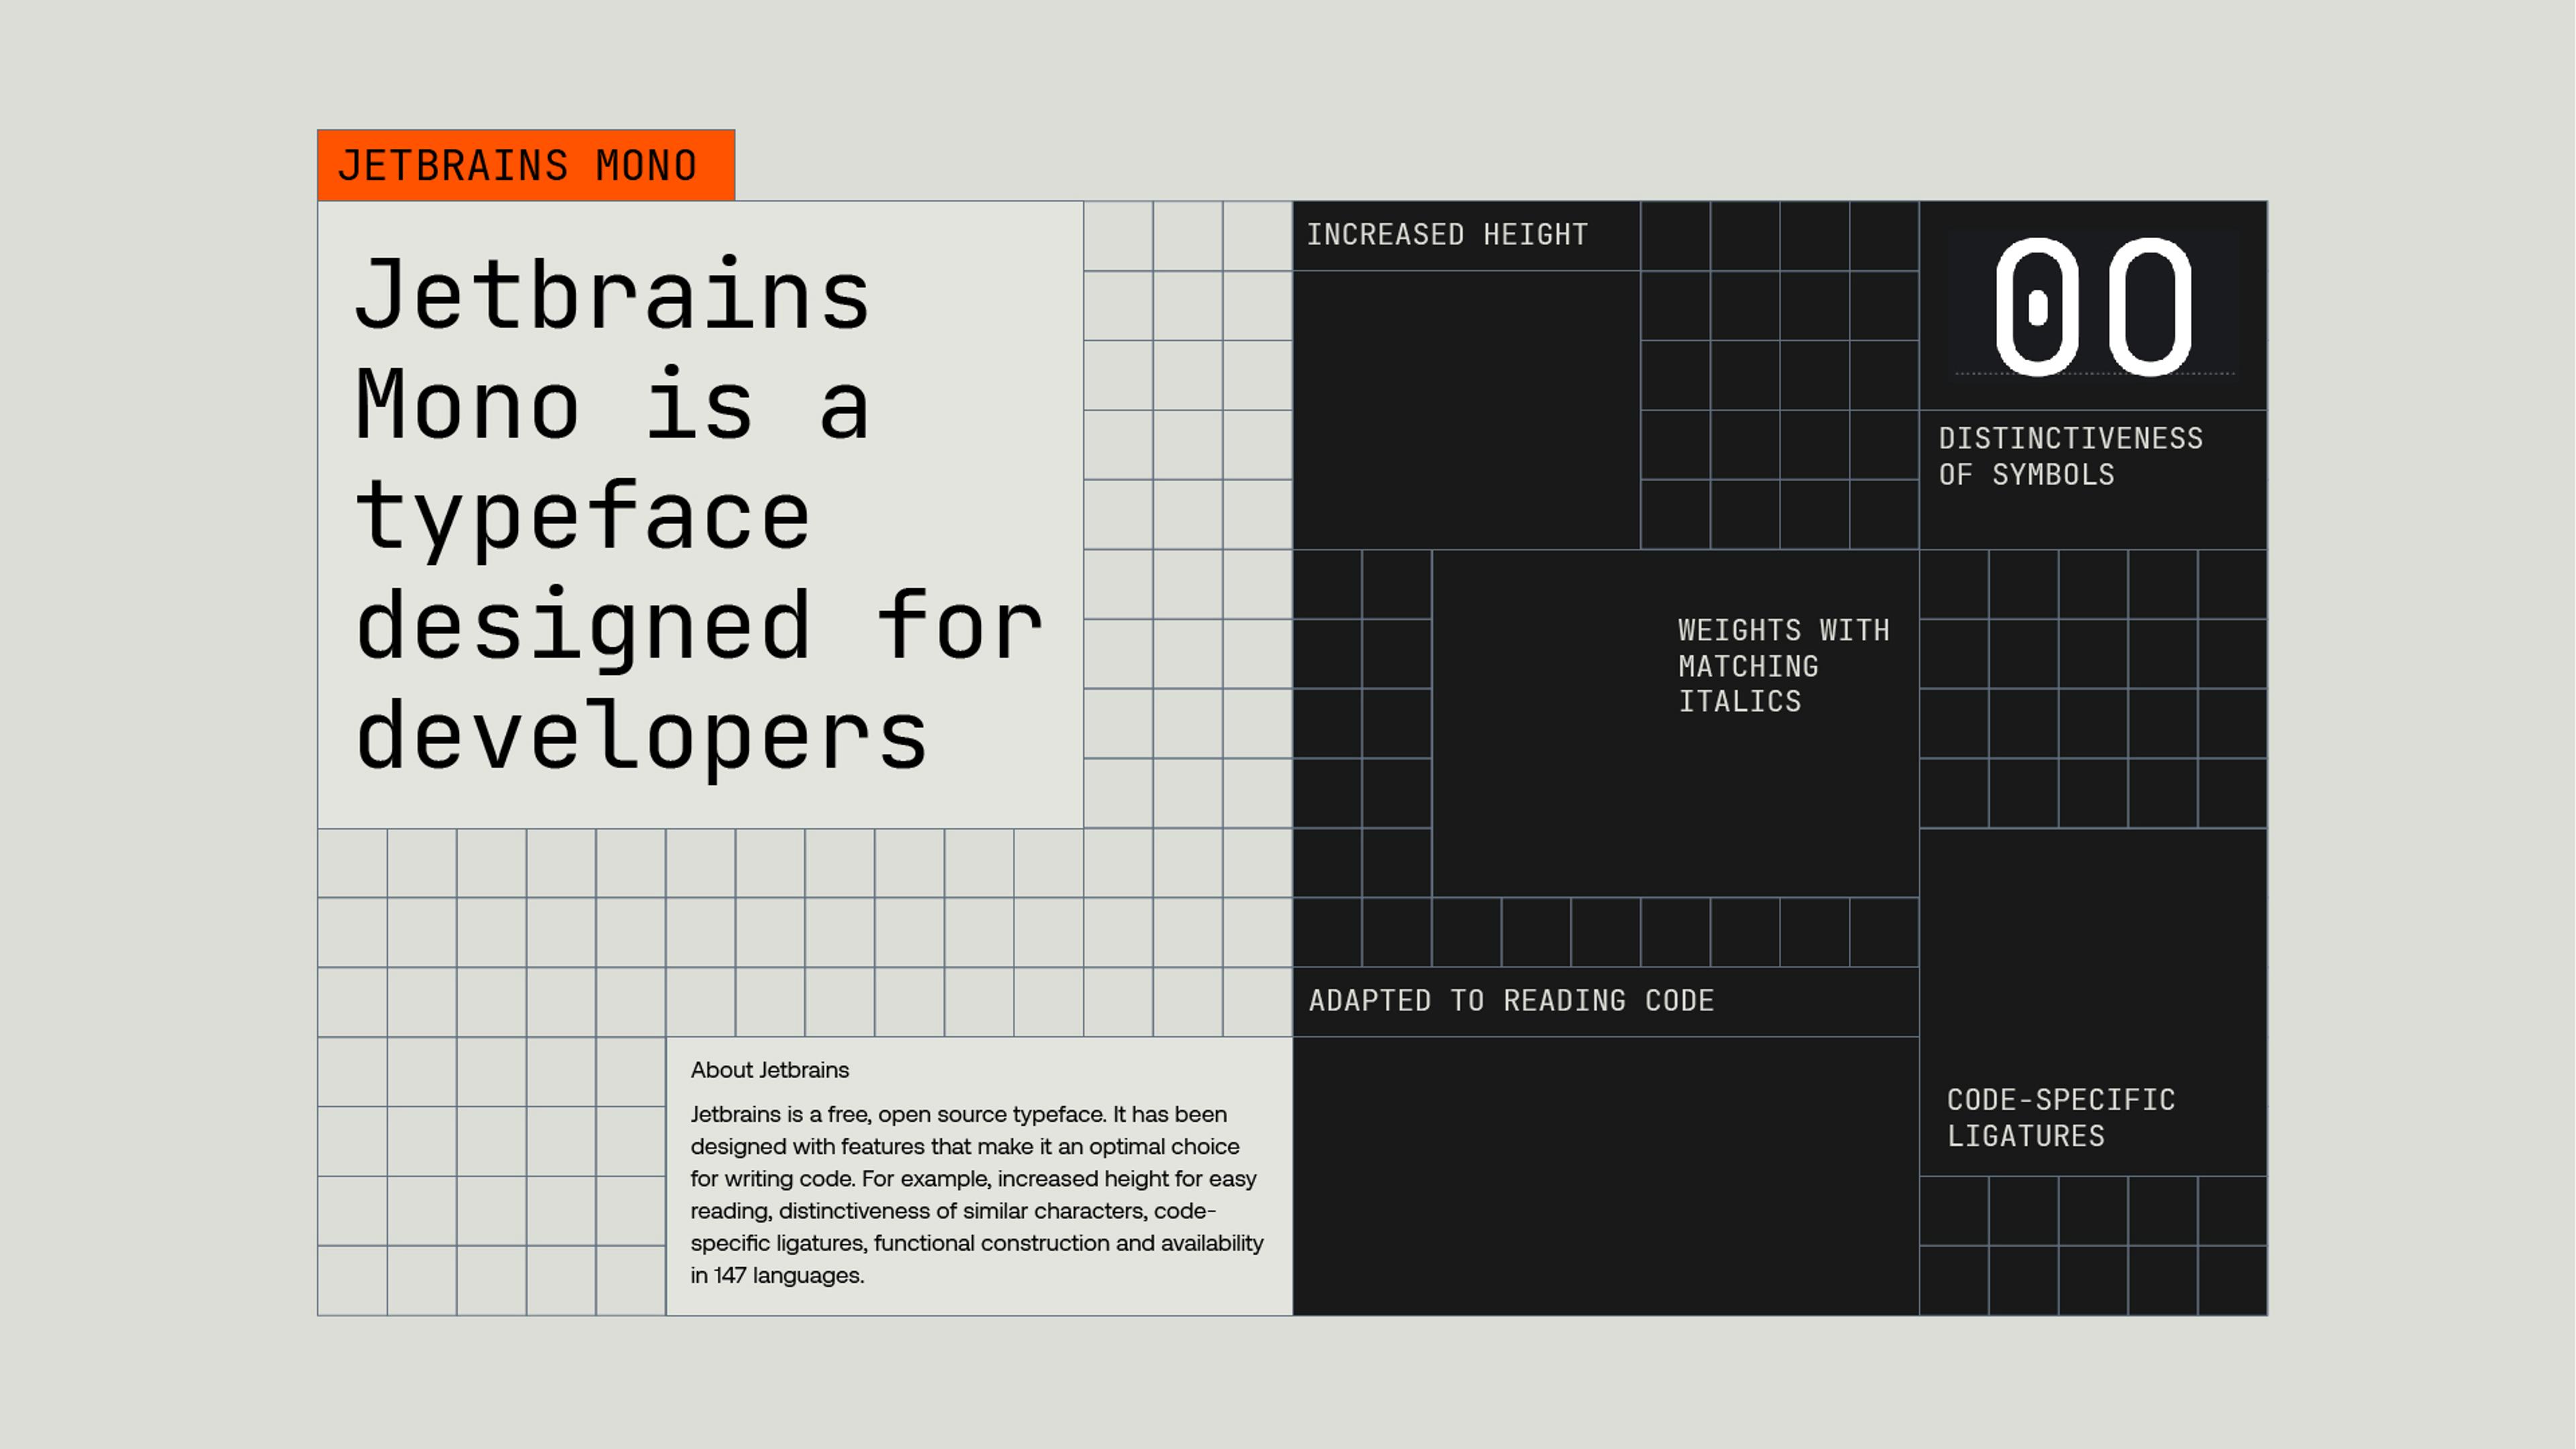 A design showcasing Jetbrains Mono, included in the Mux branding pitch